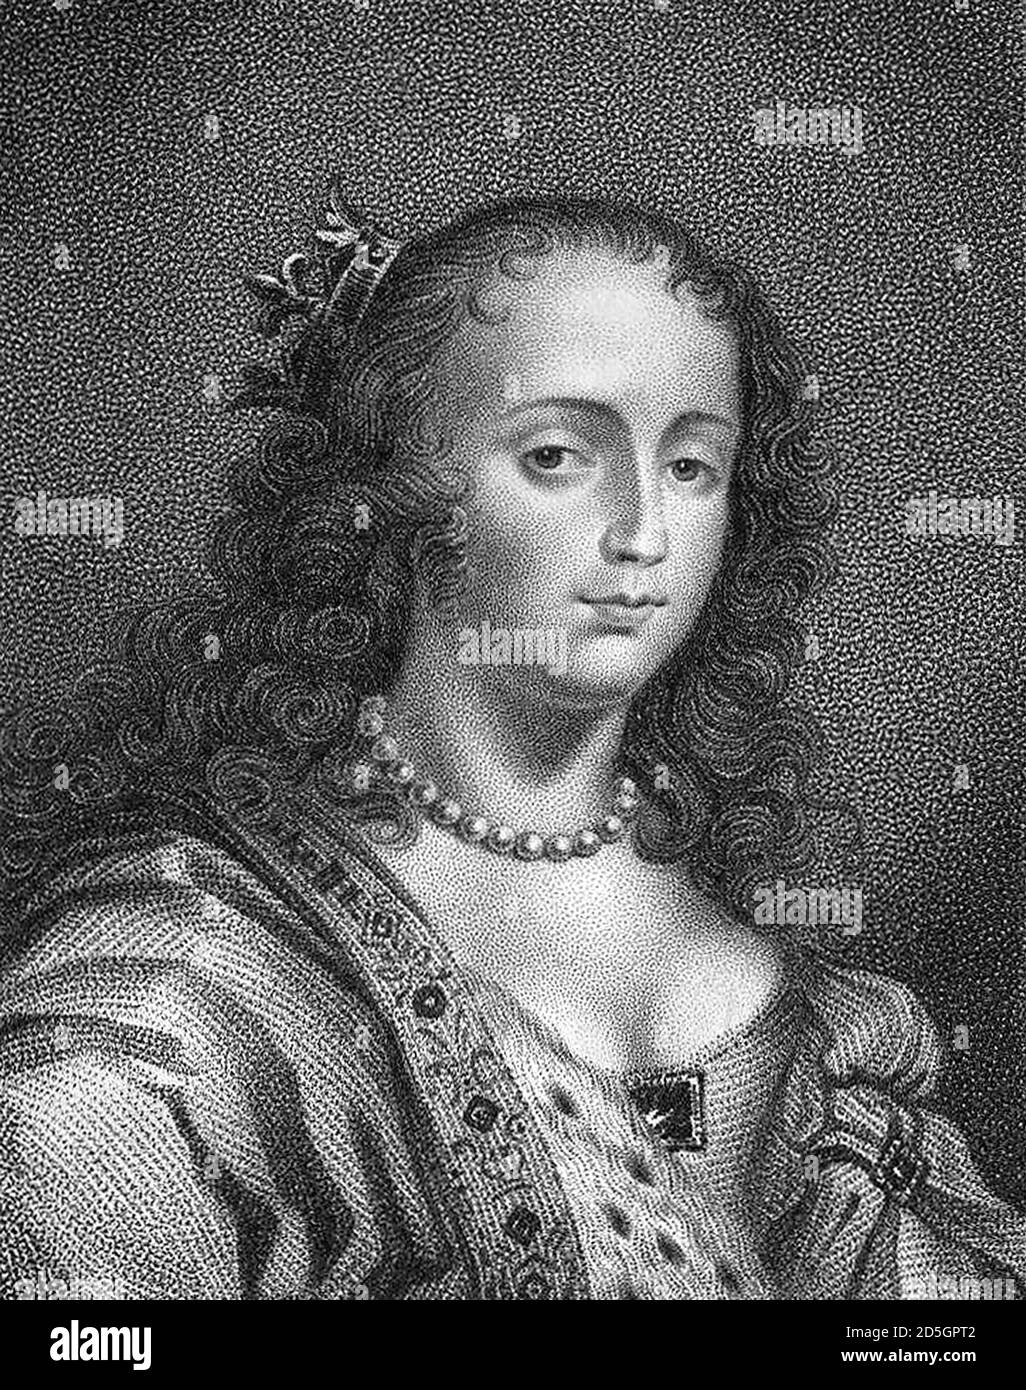 Margaret Cavendish. Portrait of Margaret Lucas Cavendish, Duchess of Newcastle-upon-Tyne (1623-1673), the 17th century English aristocrat, philosopher, poet, scientist, fiction-writer, and playwright. Stipple etching by John Alais from artwork by Abraham van Diepenbeeck, 1819 Stock Photo